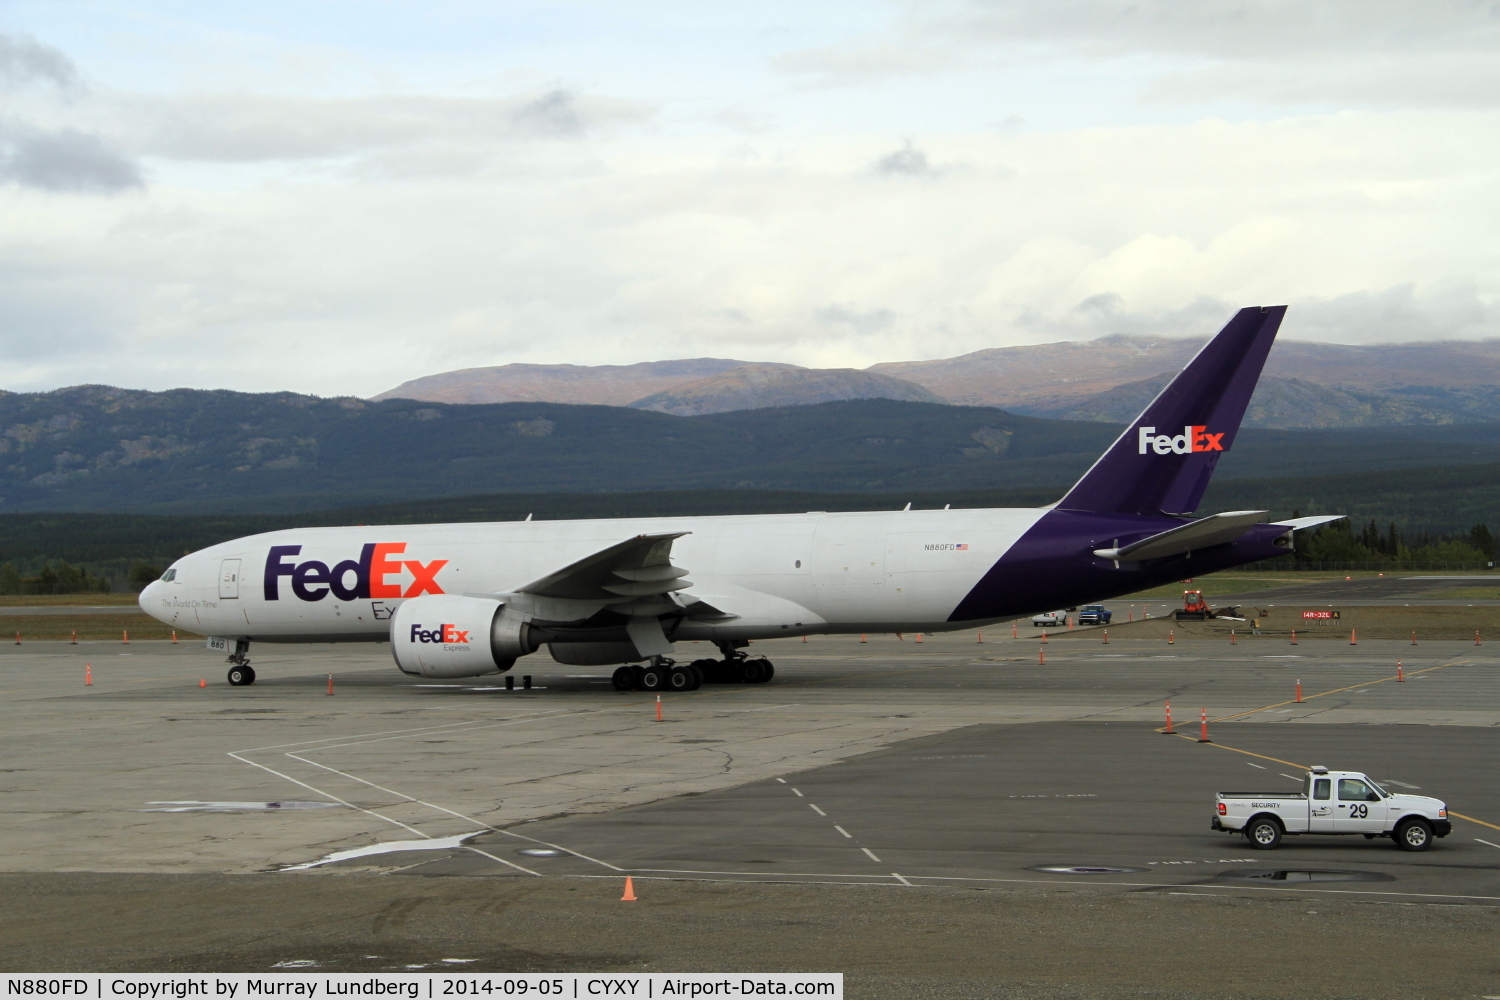 N880FD, 2008 Boeing 777-F28 C/N 32967, CYXY, Whitehorse, Yukon, was closed for an hour at 08:00 on 2014-09-04 when N880FD made an emergency landing and was kept on the main runway while being assessed. Shown here on the ramp later.